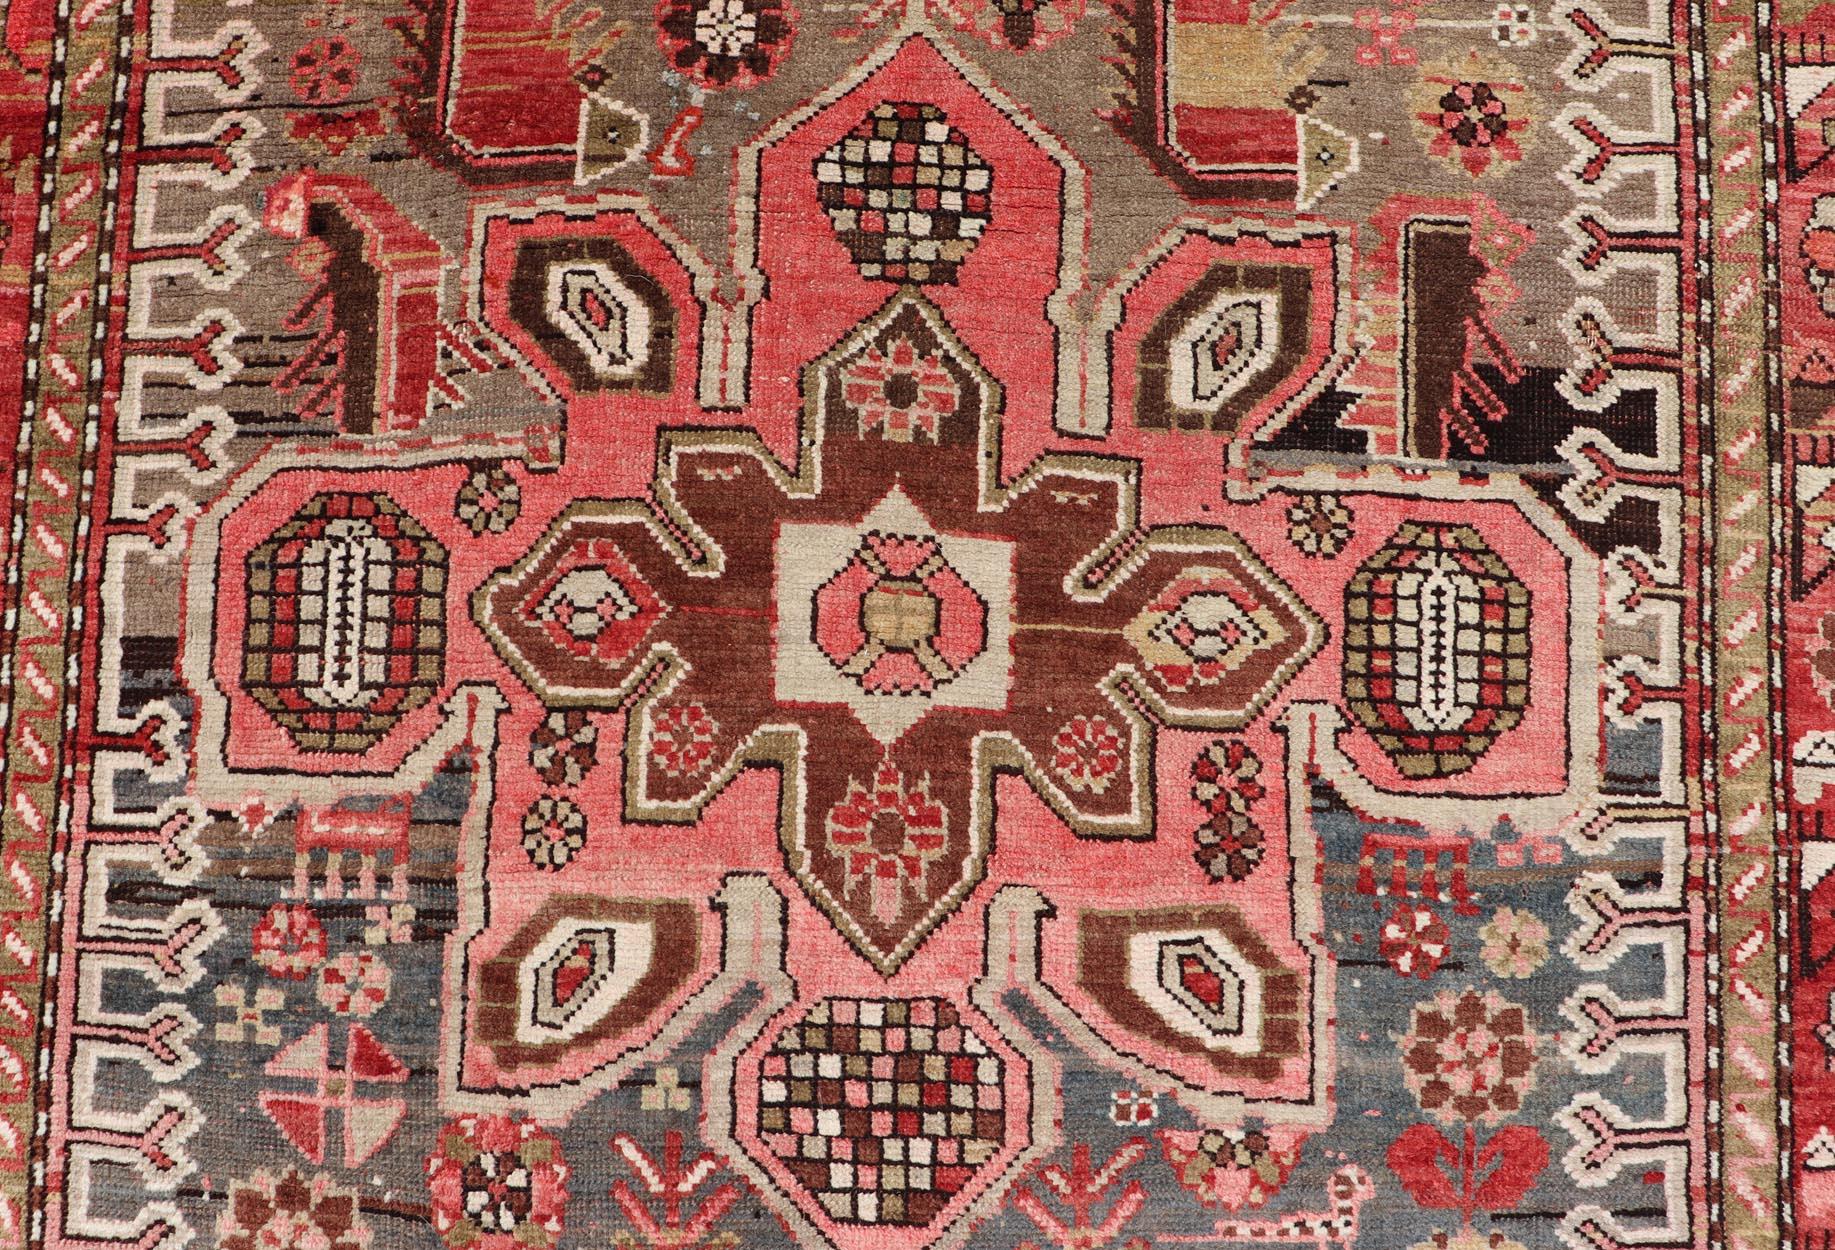 Antique Caucasian Karabagh Gallery Runner With Large Medallions Of Pink And Red. Keivan Woven Arts / rug R20-0907, country of origin / type: Caucus / Caucasian, circa 1930.
Measures: 4'1 x 9'2 
This antique Karabagh rug displays an intricate design